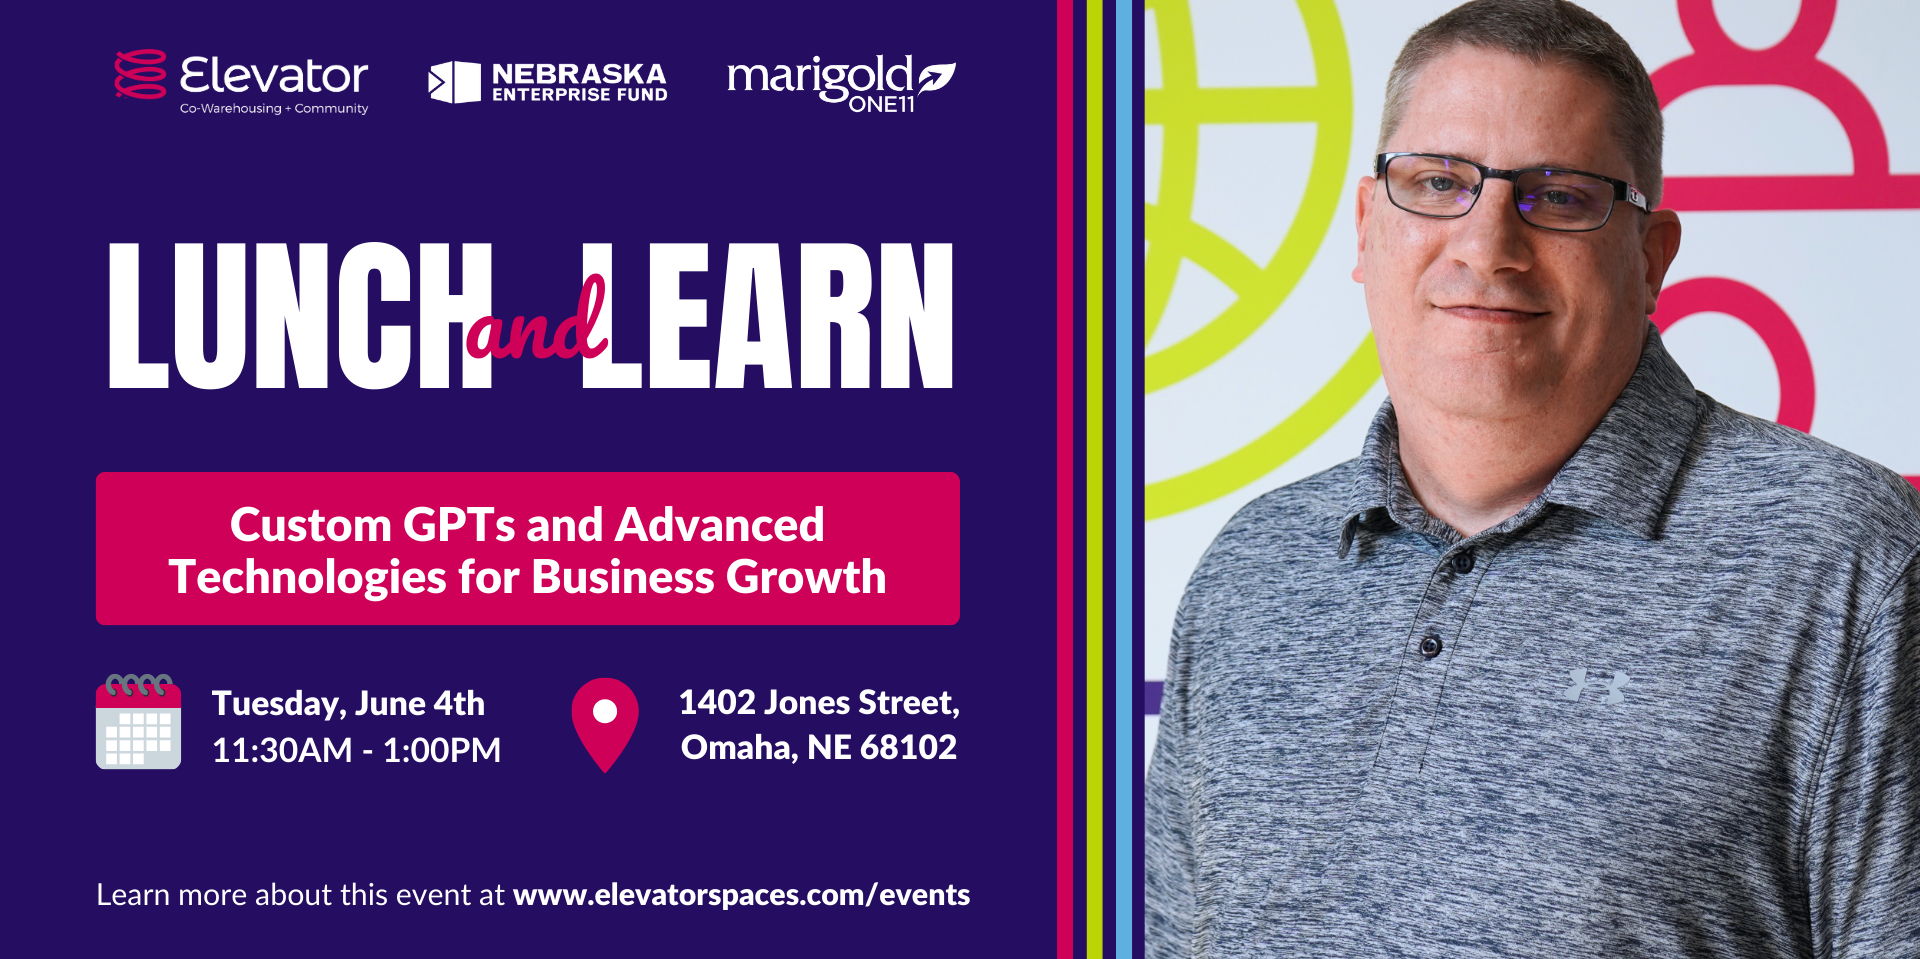 Marigold Lunch & Learn | Custom GPTs and Advanced Technologies for Business Growth promotional image